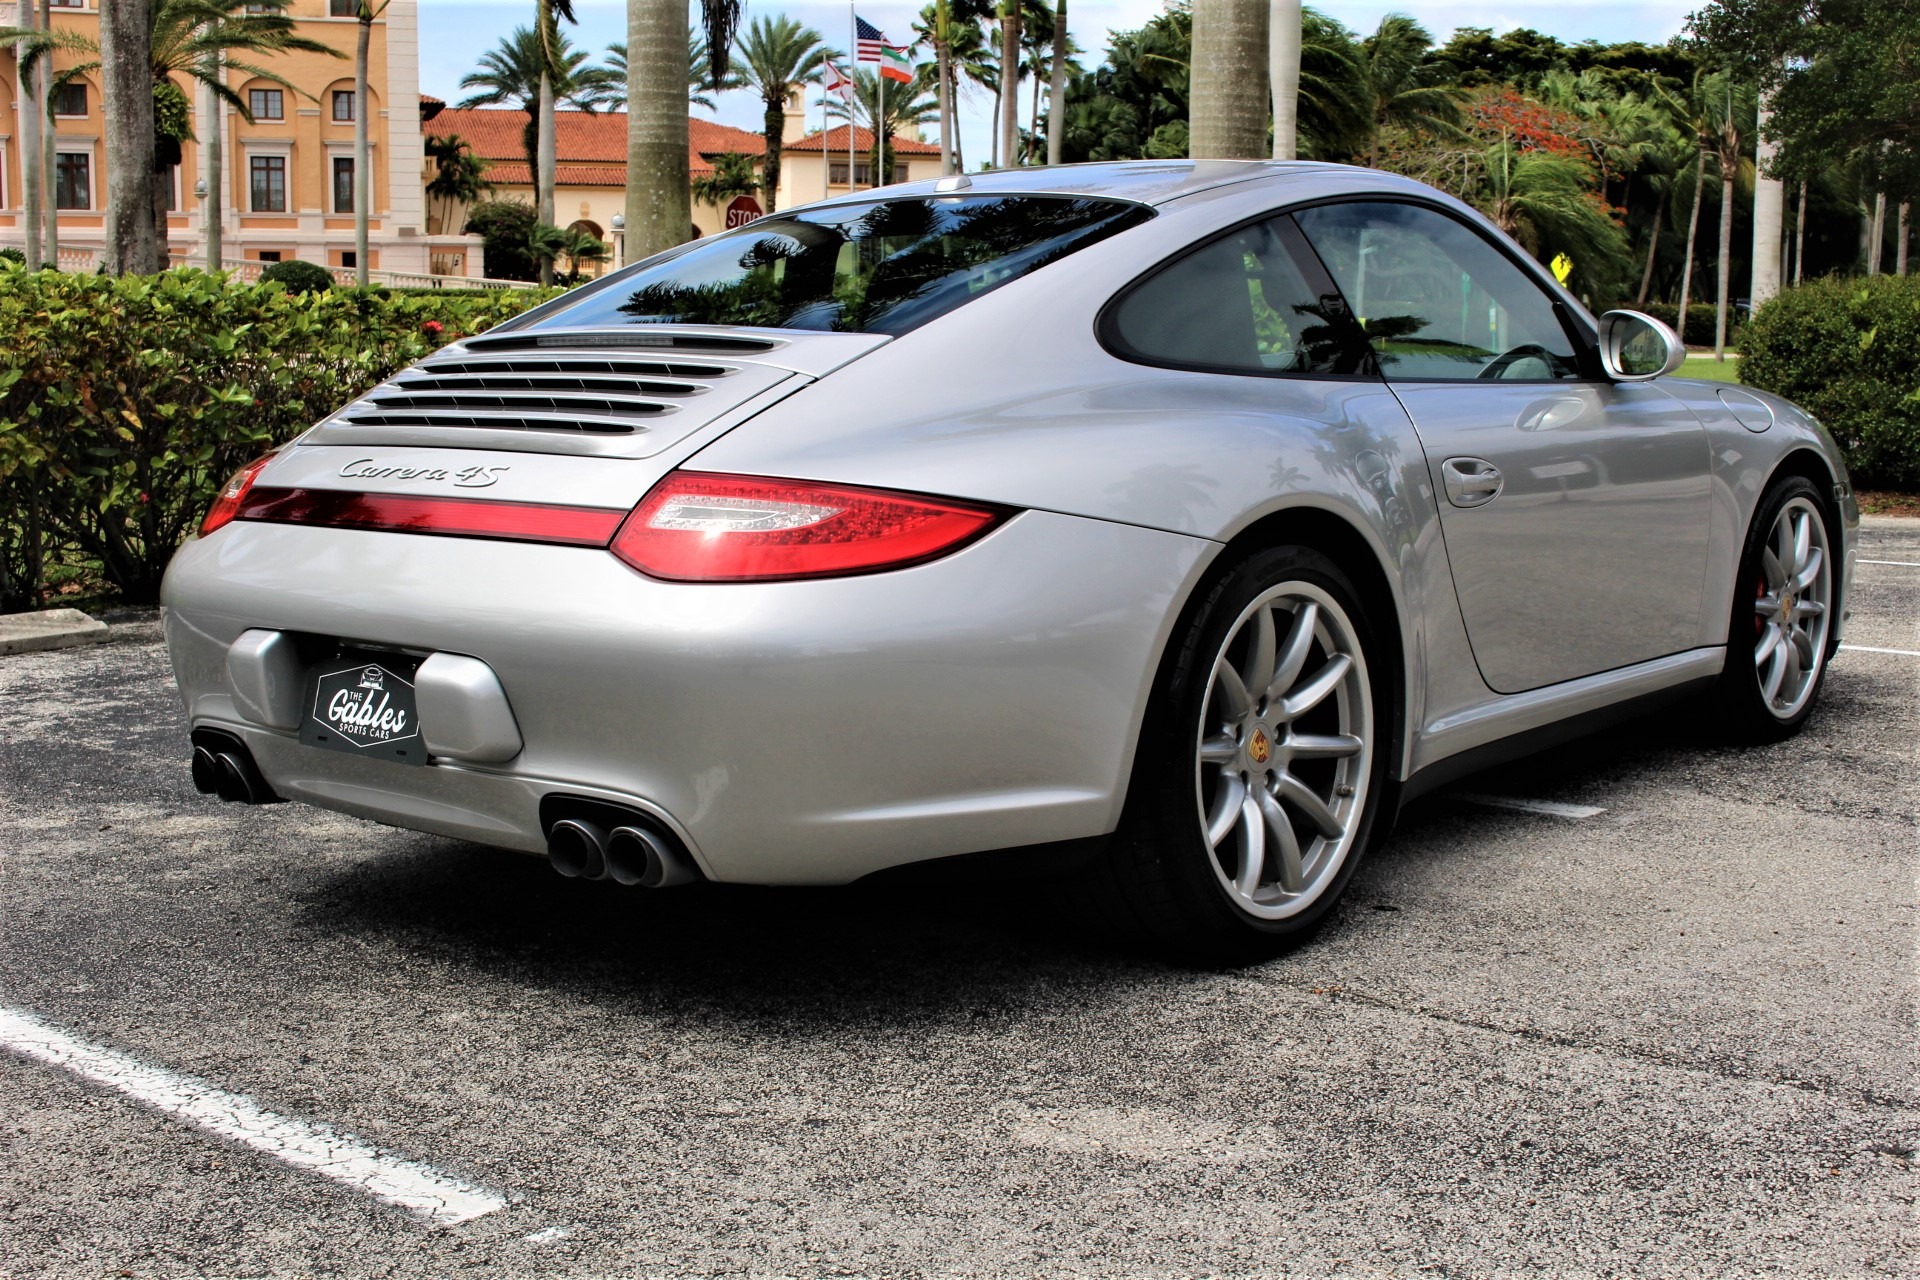 Used 2009 Porsche 911 Carrera 4S for sale Sold at The Gables Sports Cars in Miami FL 33146 1